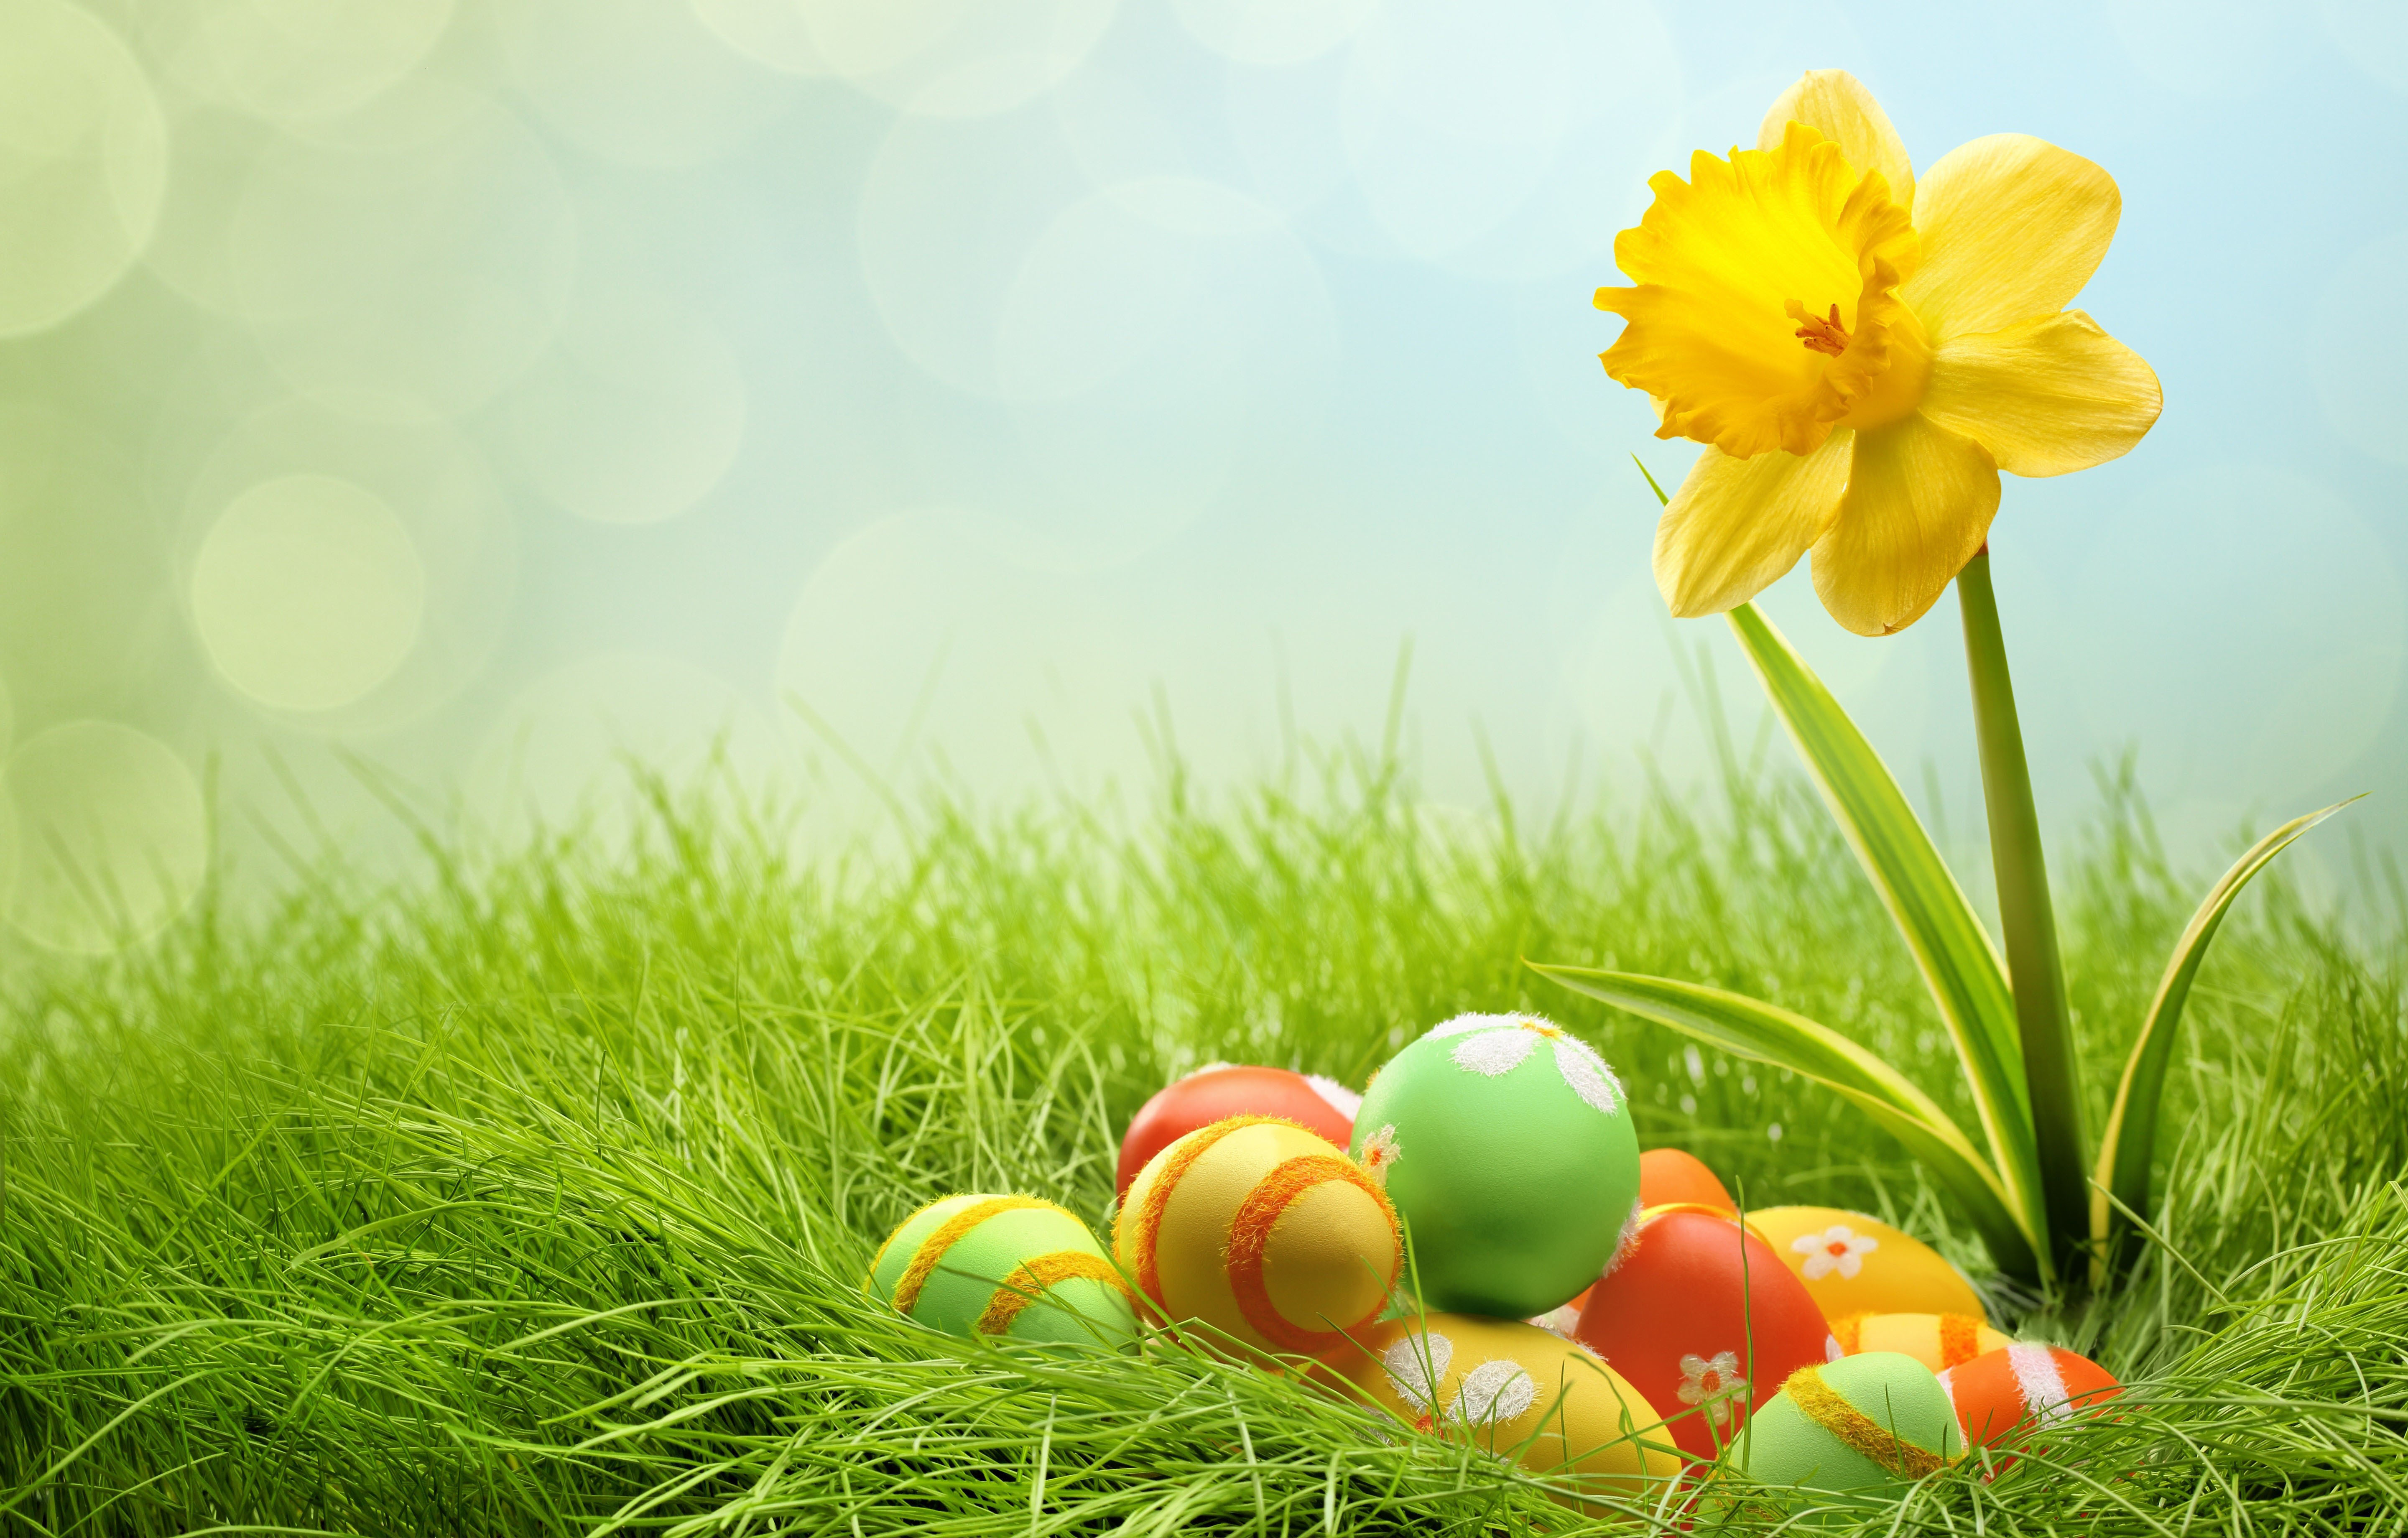 Flower For Easter Wallpaper And Image Pictures Photos